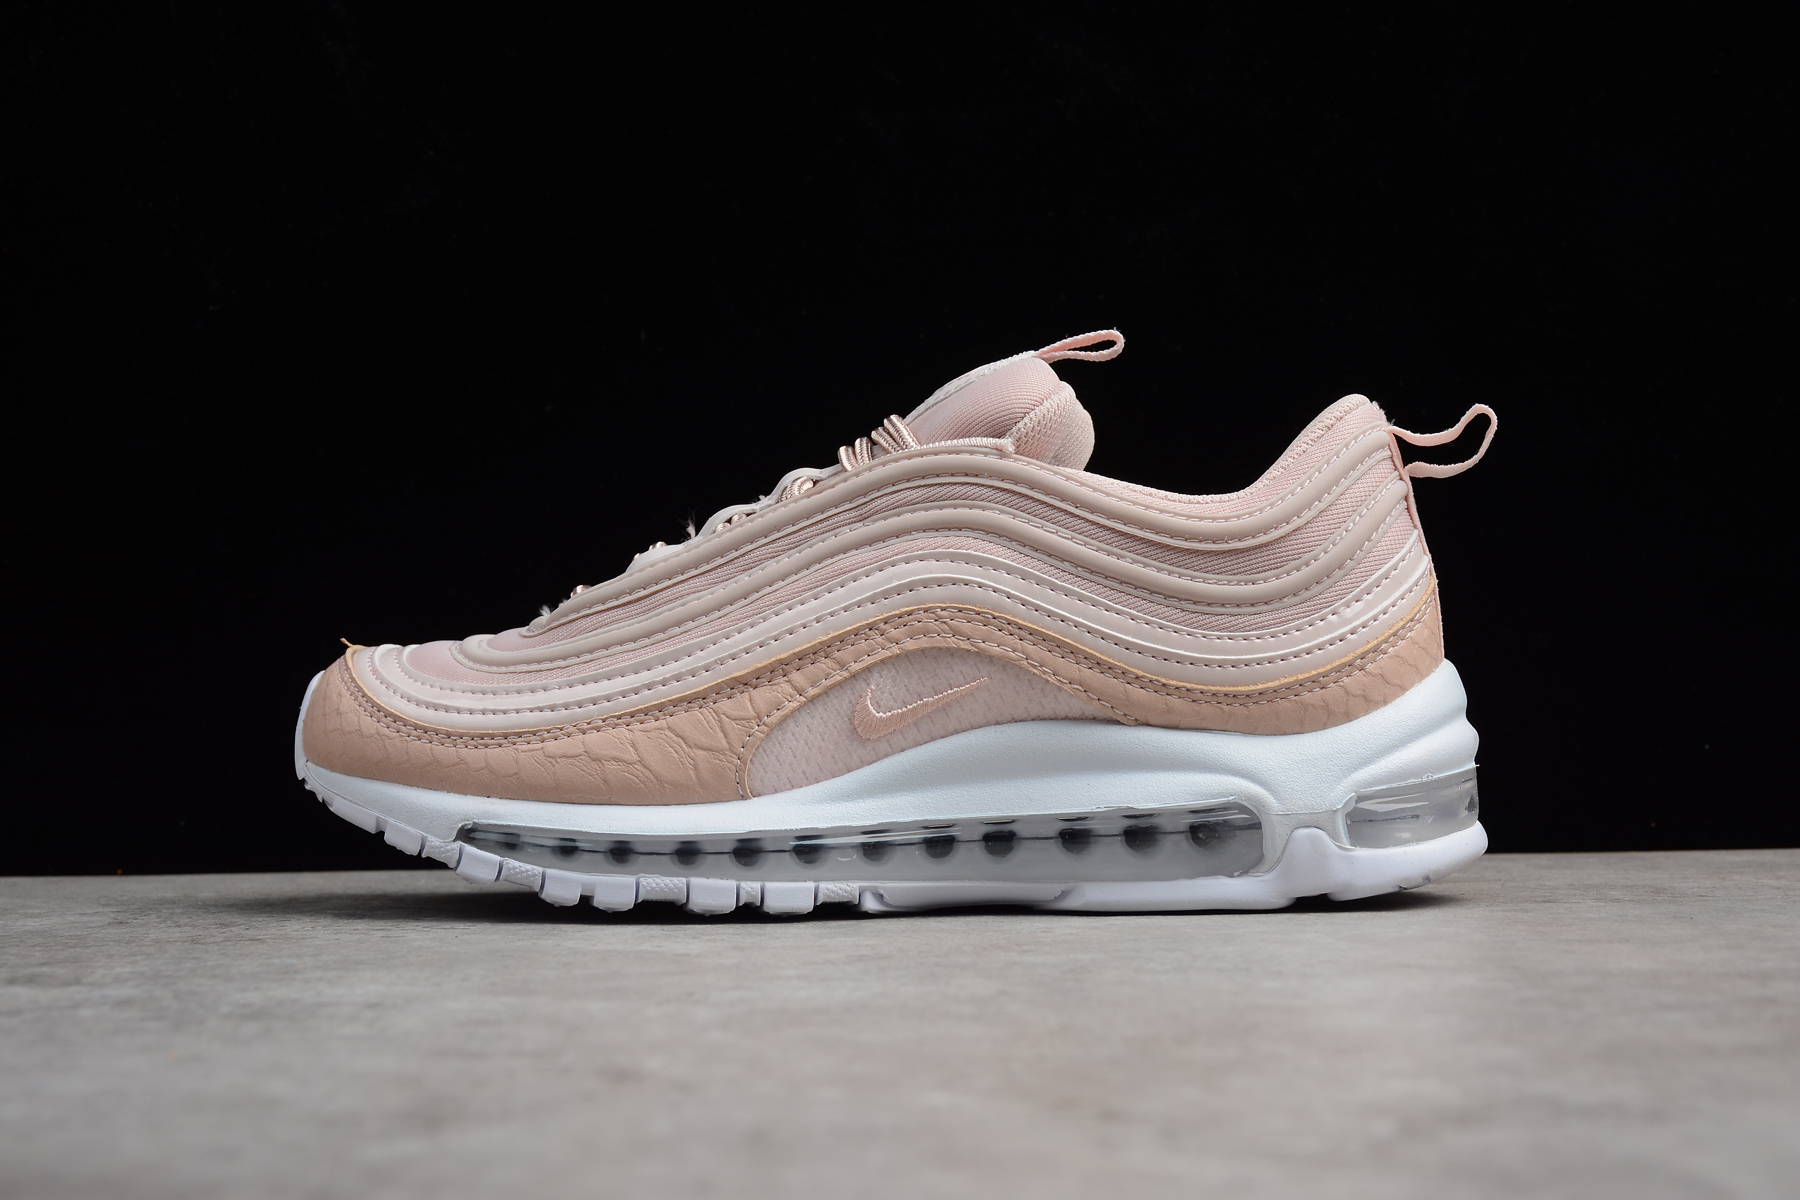 Women's Nike Air Max 97 OG Premium "Silt Red" Pink Scales 917646-600